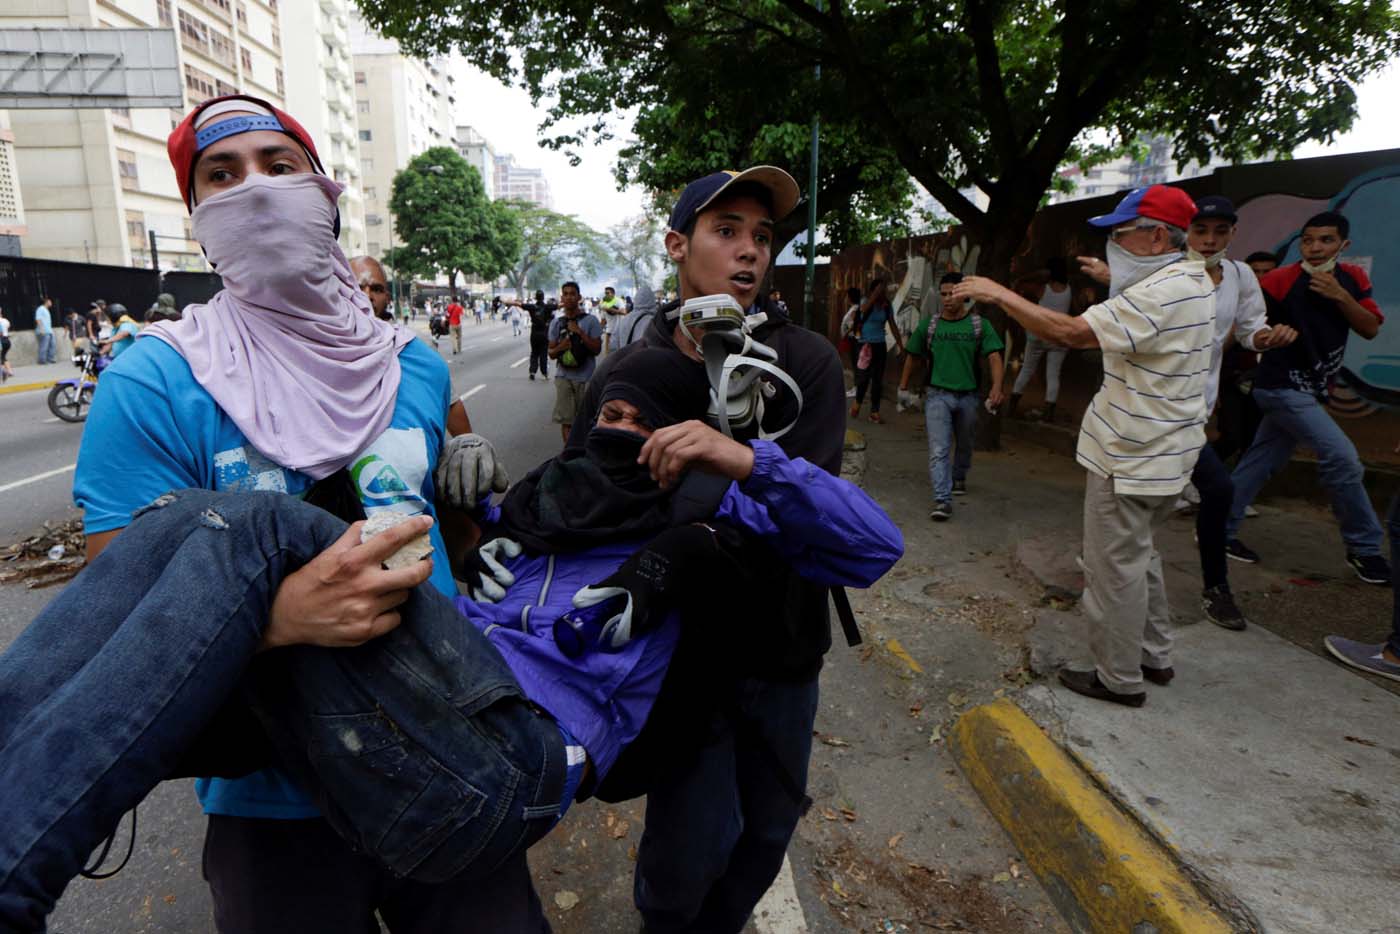 An injured demonstrator is helped during clashes with riot police while rallying against Venezuela's President Nicolas Maduro in Caracas, Venezuela, April 20, 2017. REUTERS/Marco Bello